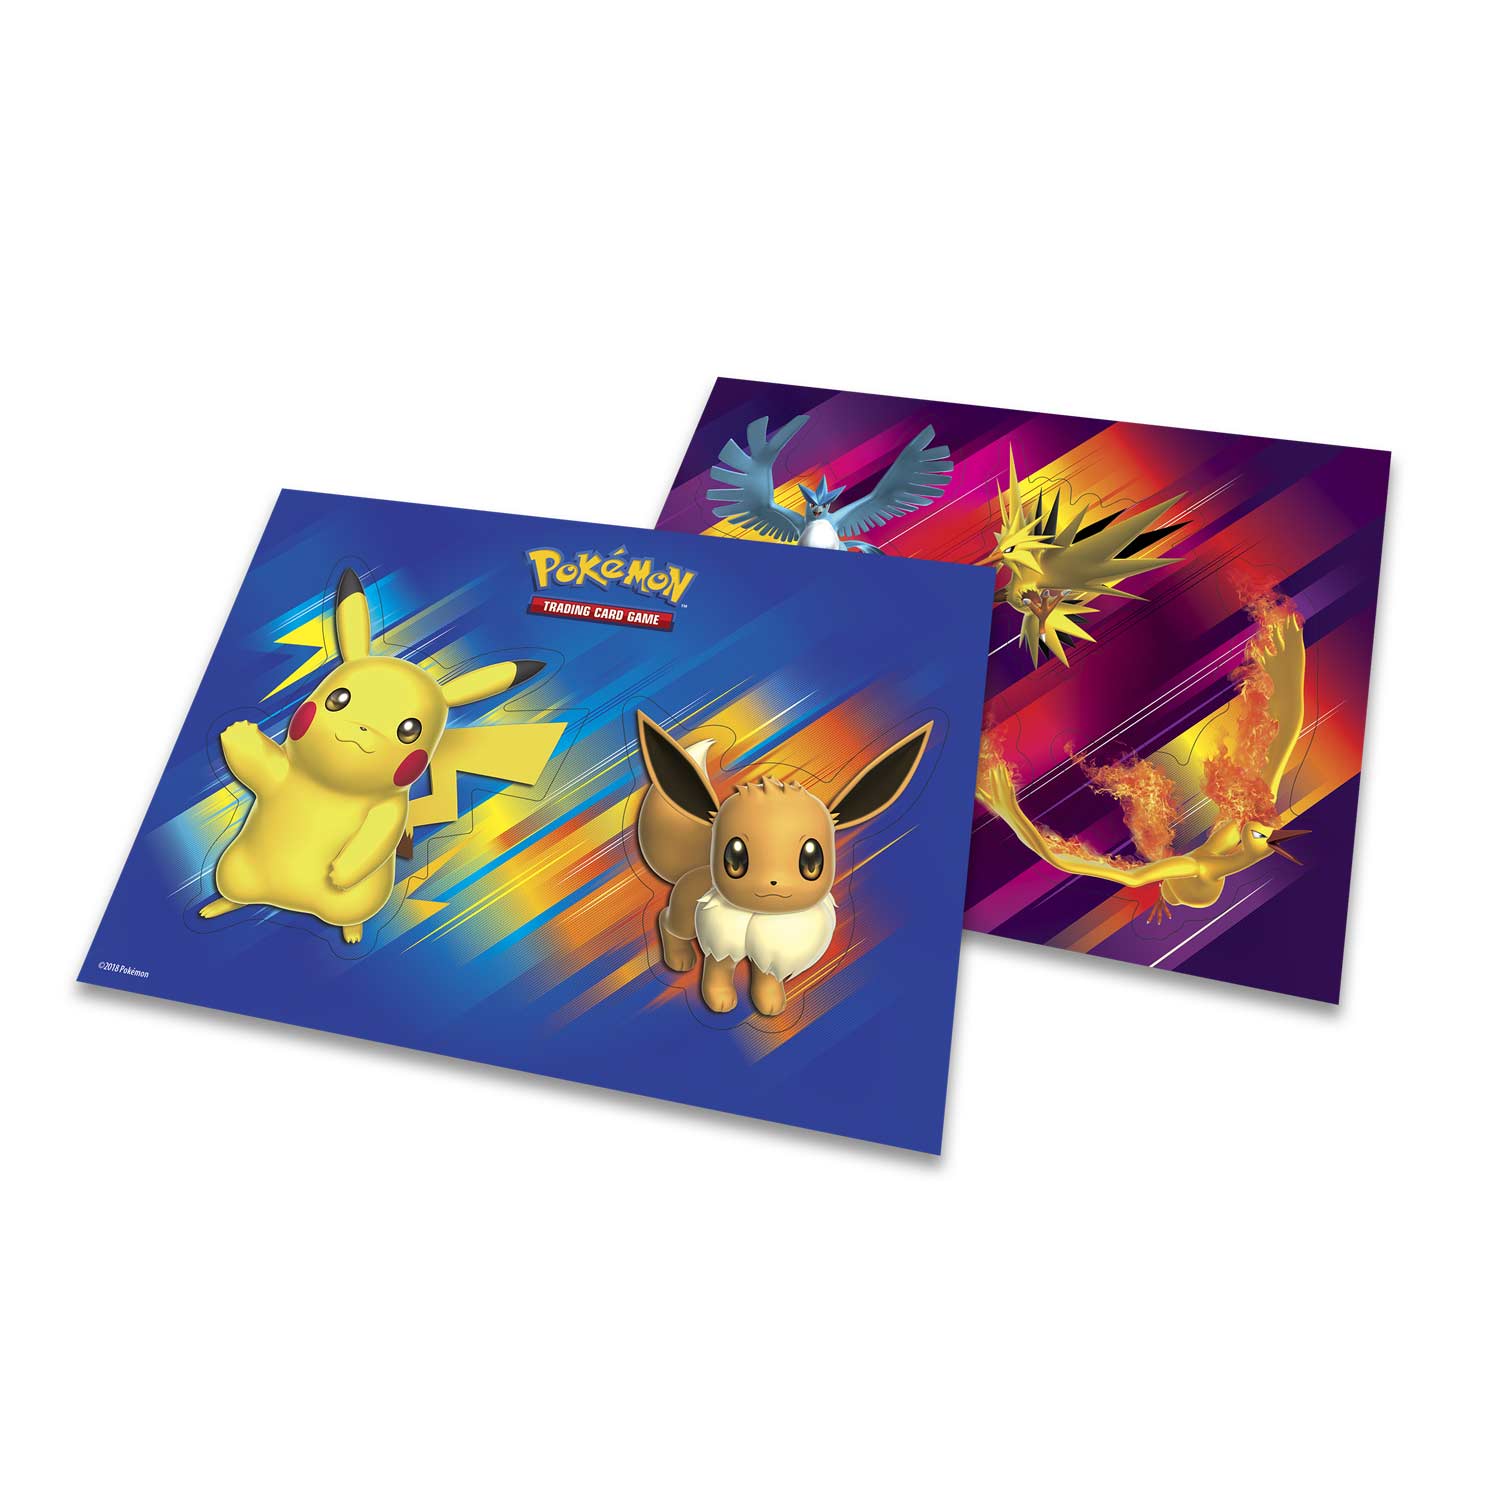 Pokemon 80418 TCG Fall 2018 Collector's Chest Tin Featuring Pikachu & Eevee for sale online 